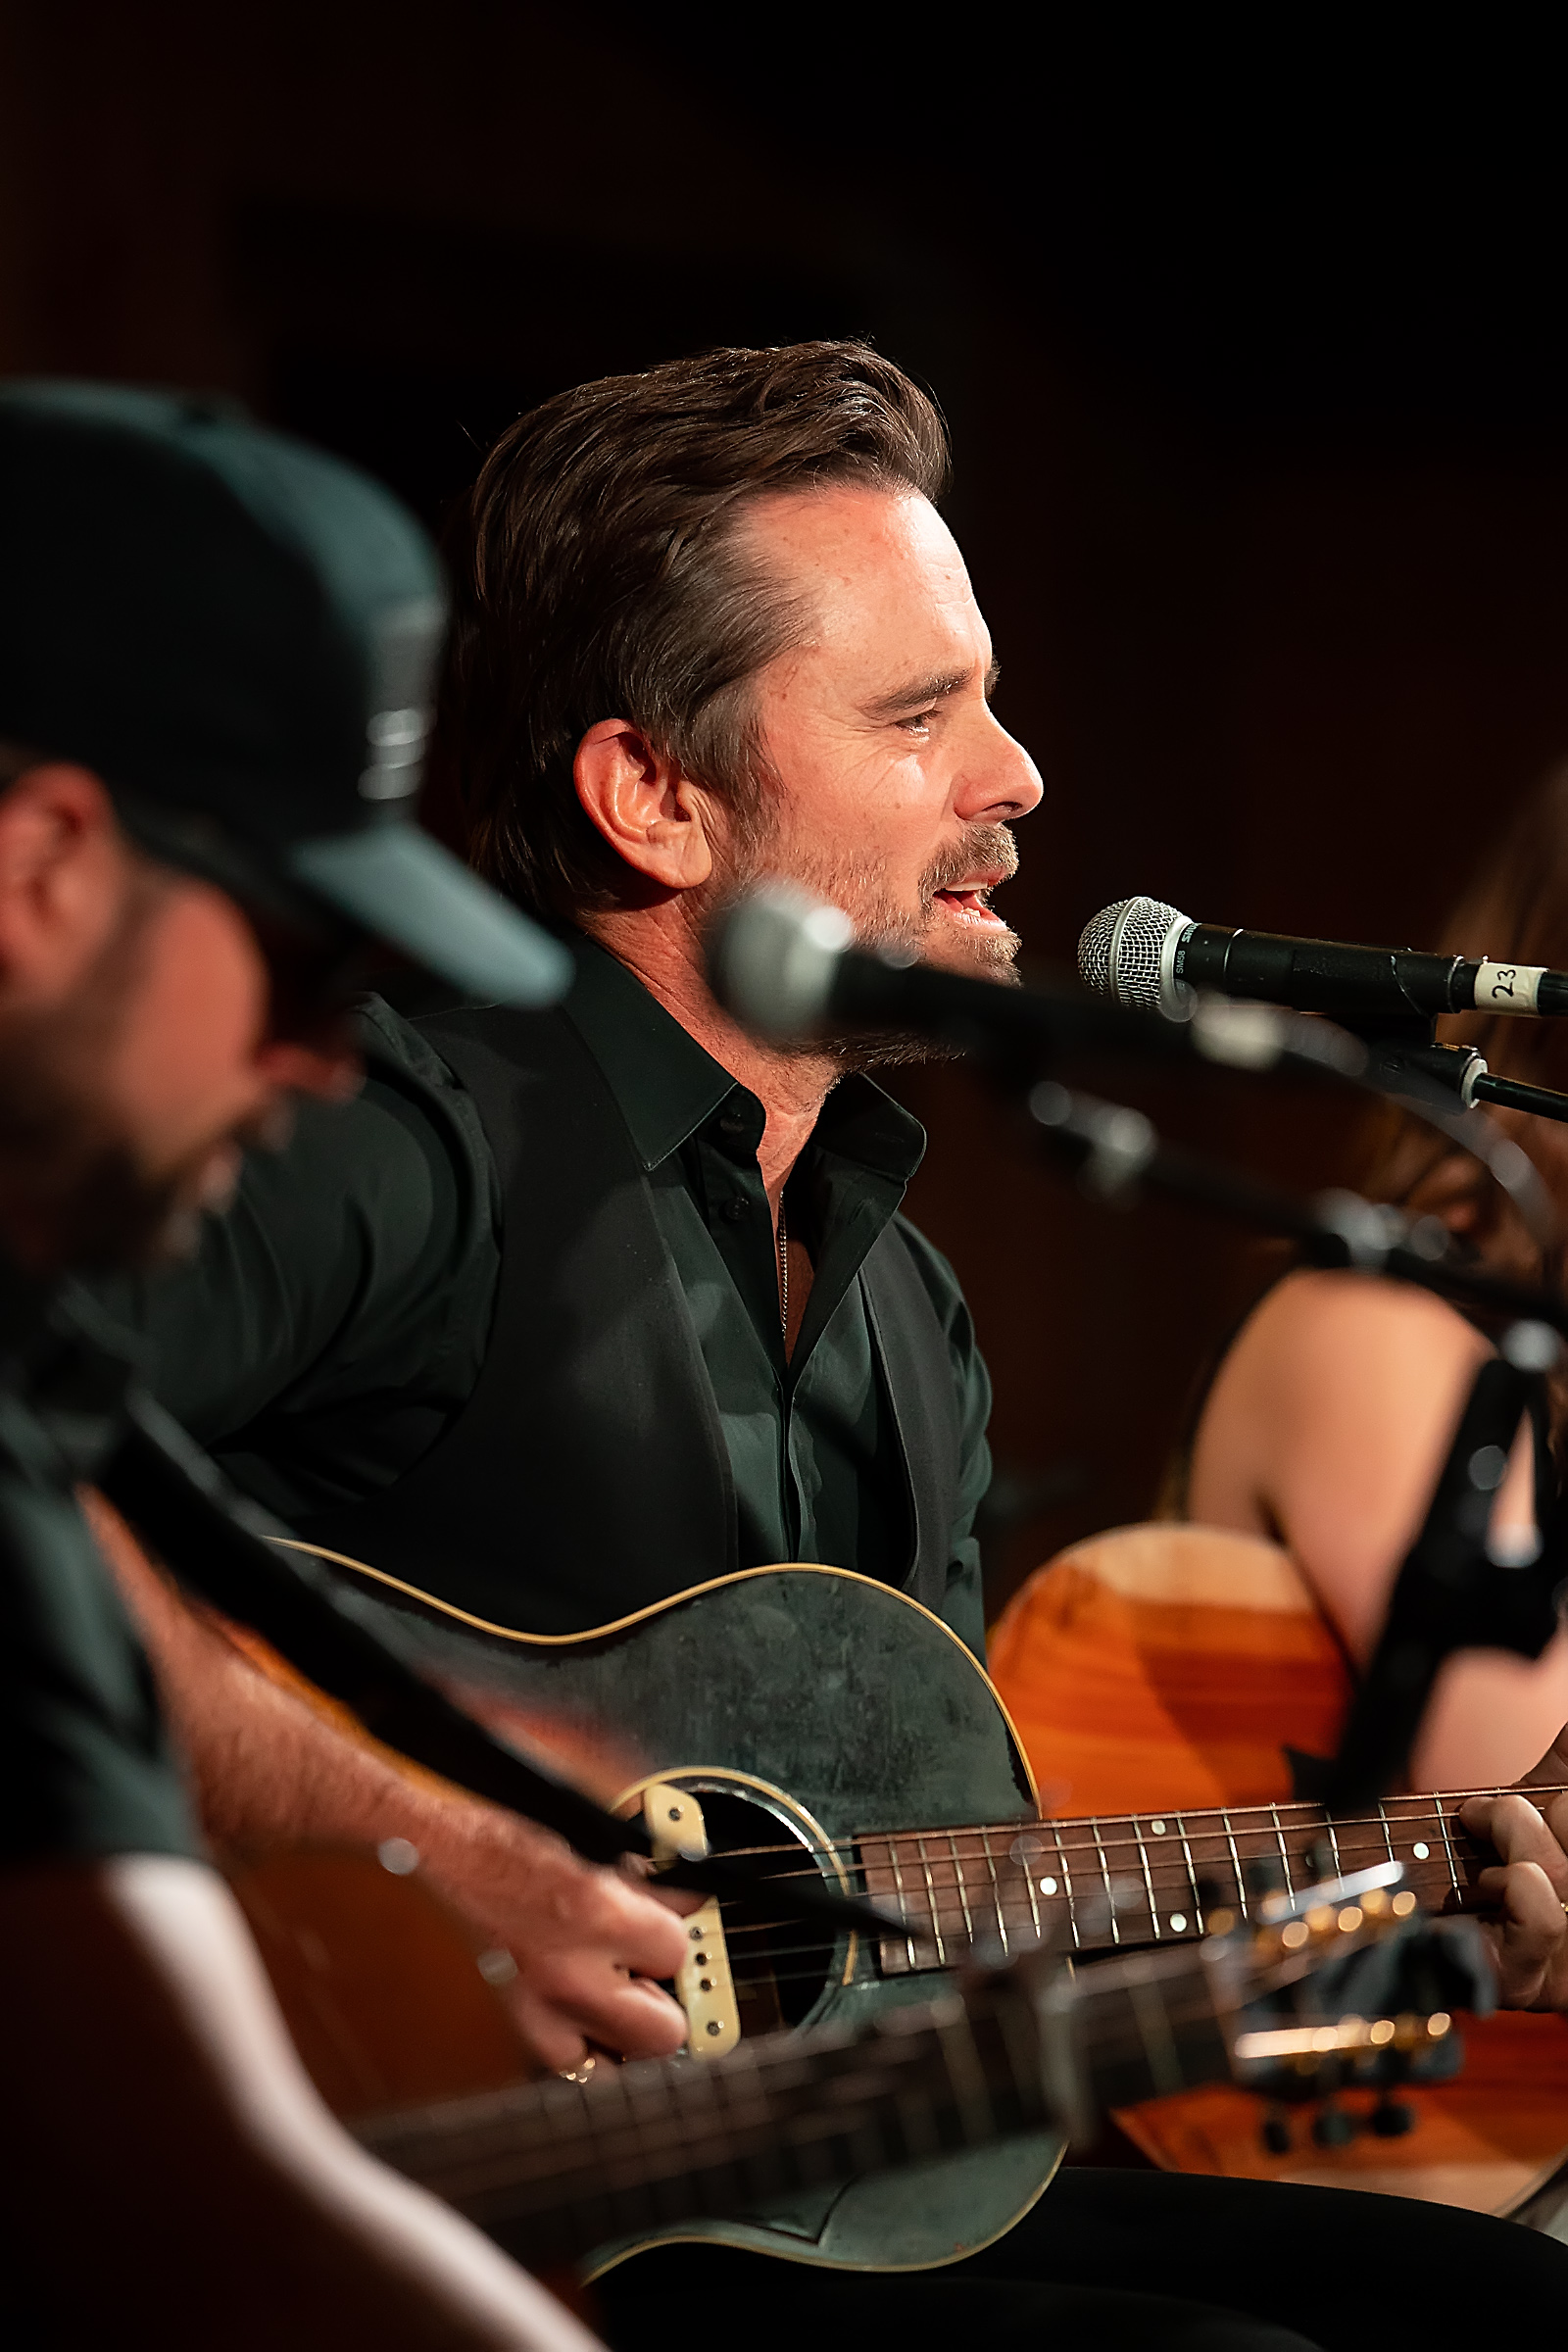 Support for Alive patients, Alive & The Bluebird, Charles Esten